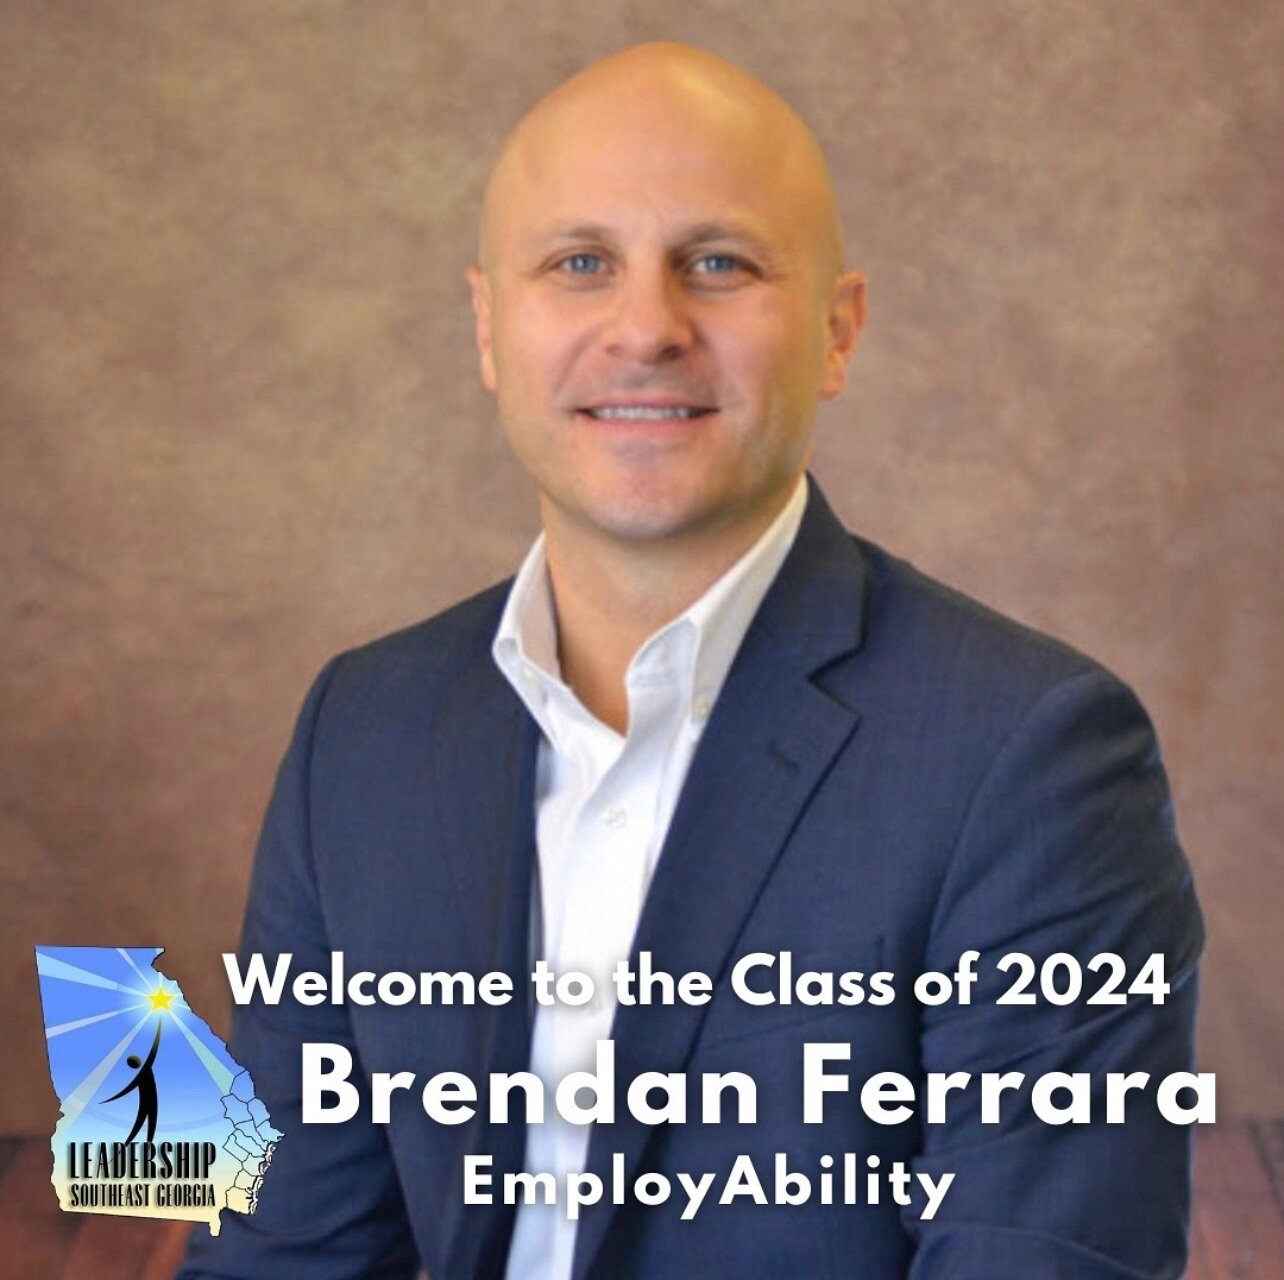 Congratulations Brendan! #repost
👨&zwj;💼 Brendan Ferrara, the President and CEO of EmployAbility, has an impressive background in education and leadership. With experience as an instructor, department chair, and academic dean at Savannah Technical 